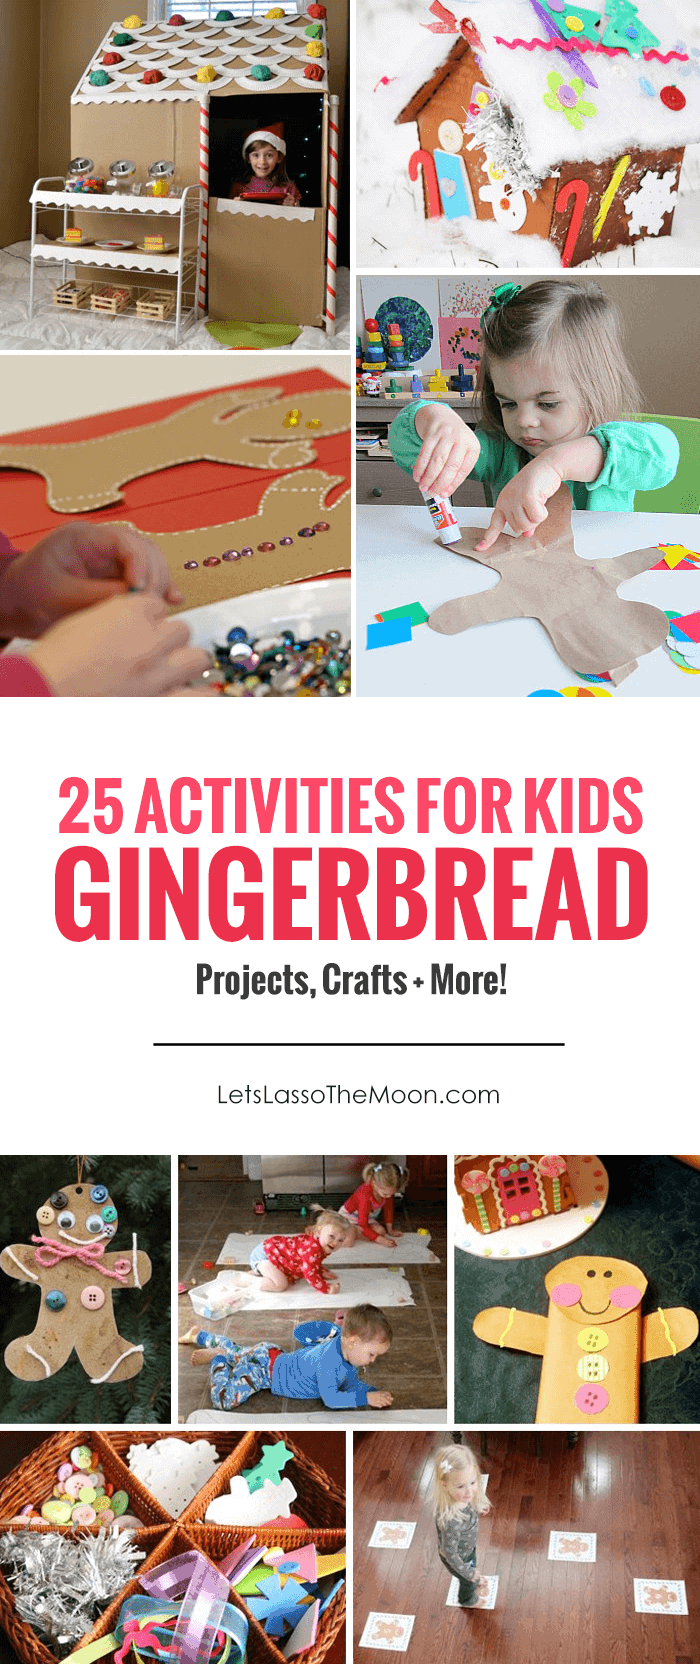 25 Gingerbread Activities for Kids: Sweet + Playful Ideas for Children *love this list of projects